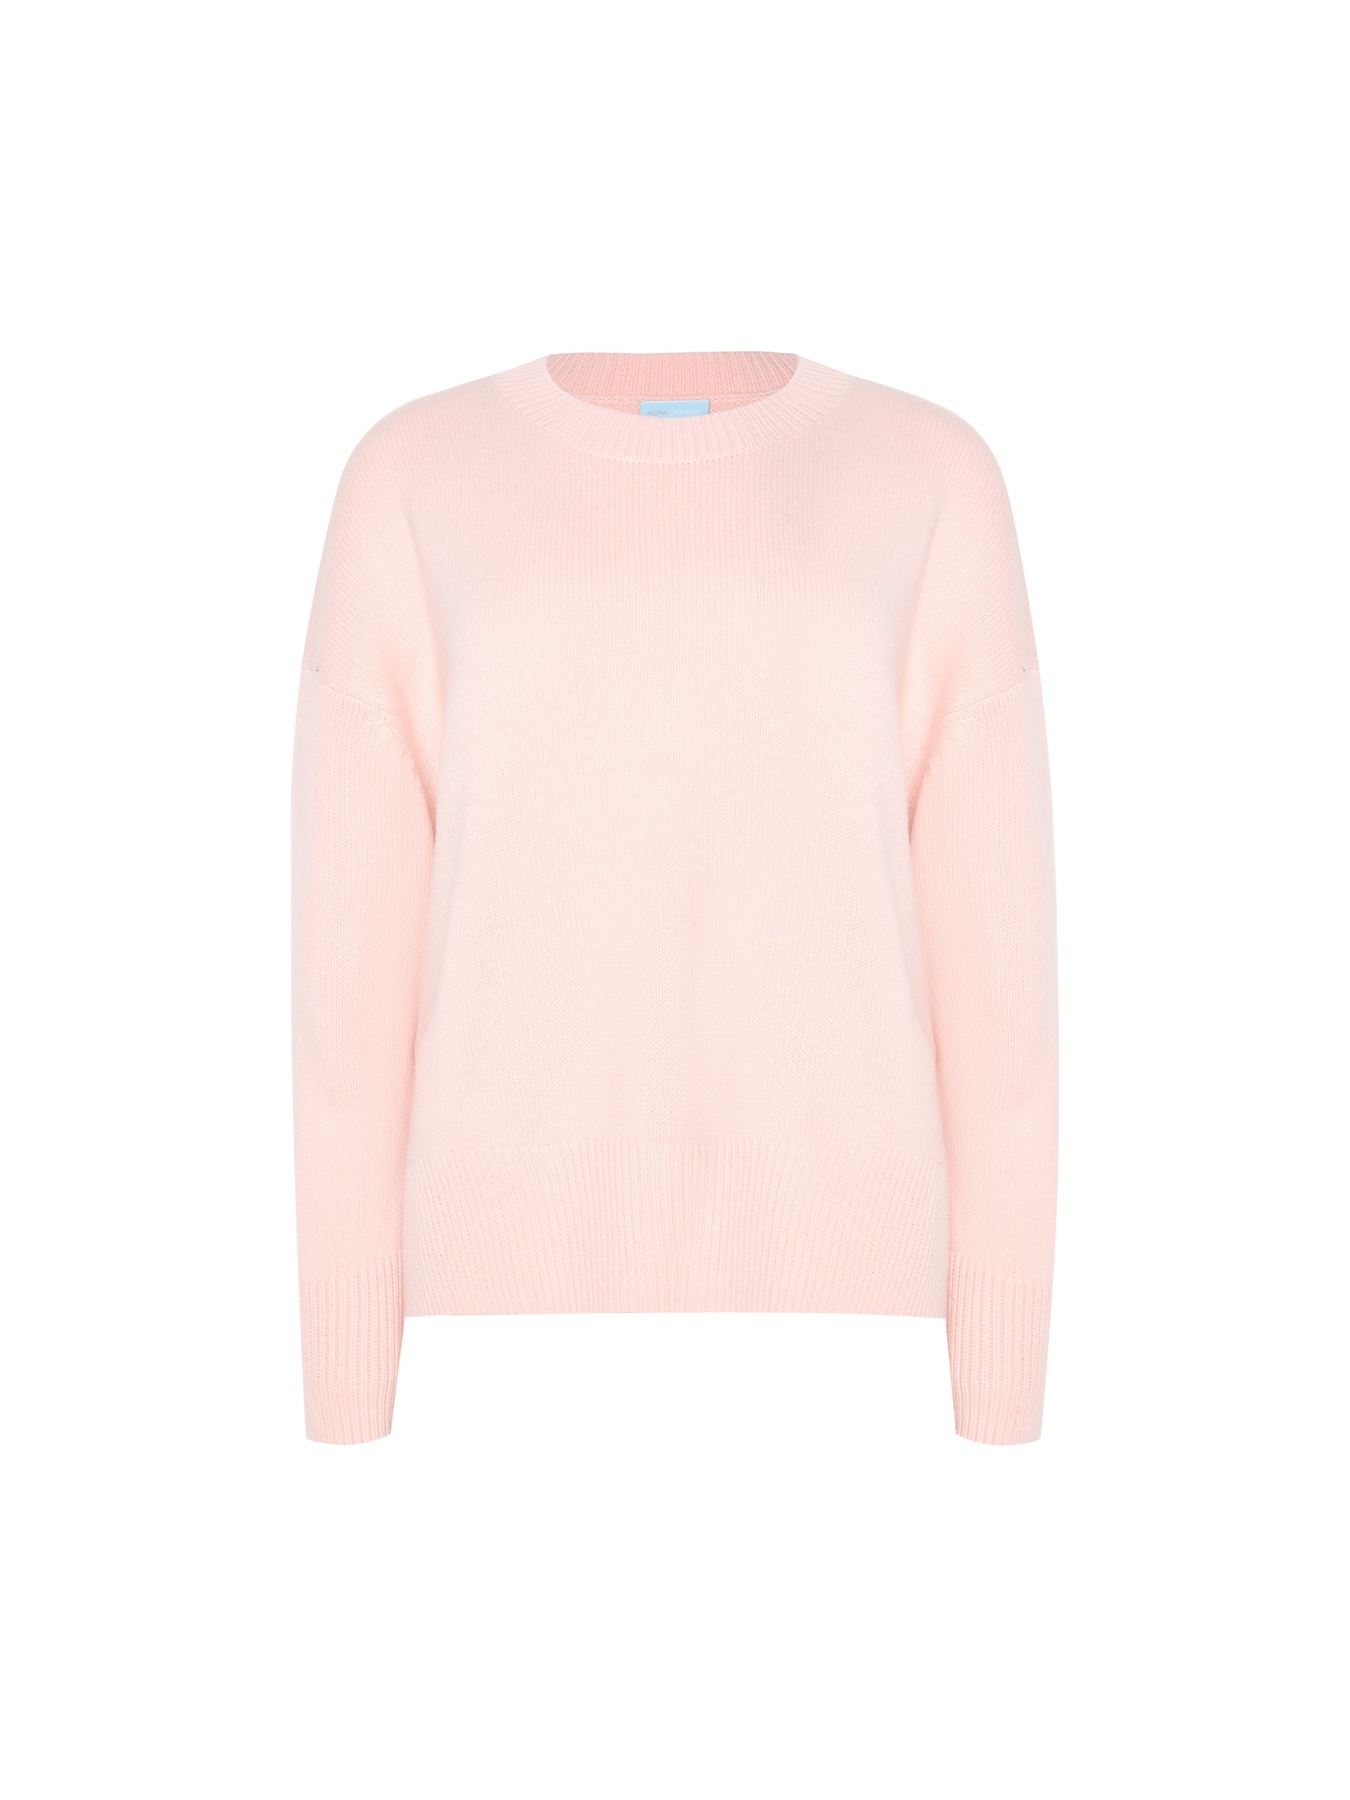 CANDY GIRL PULLOVER